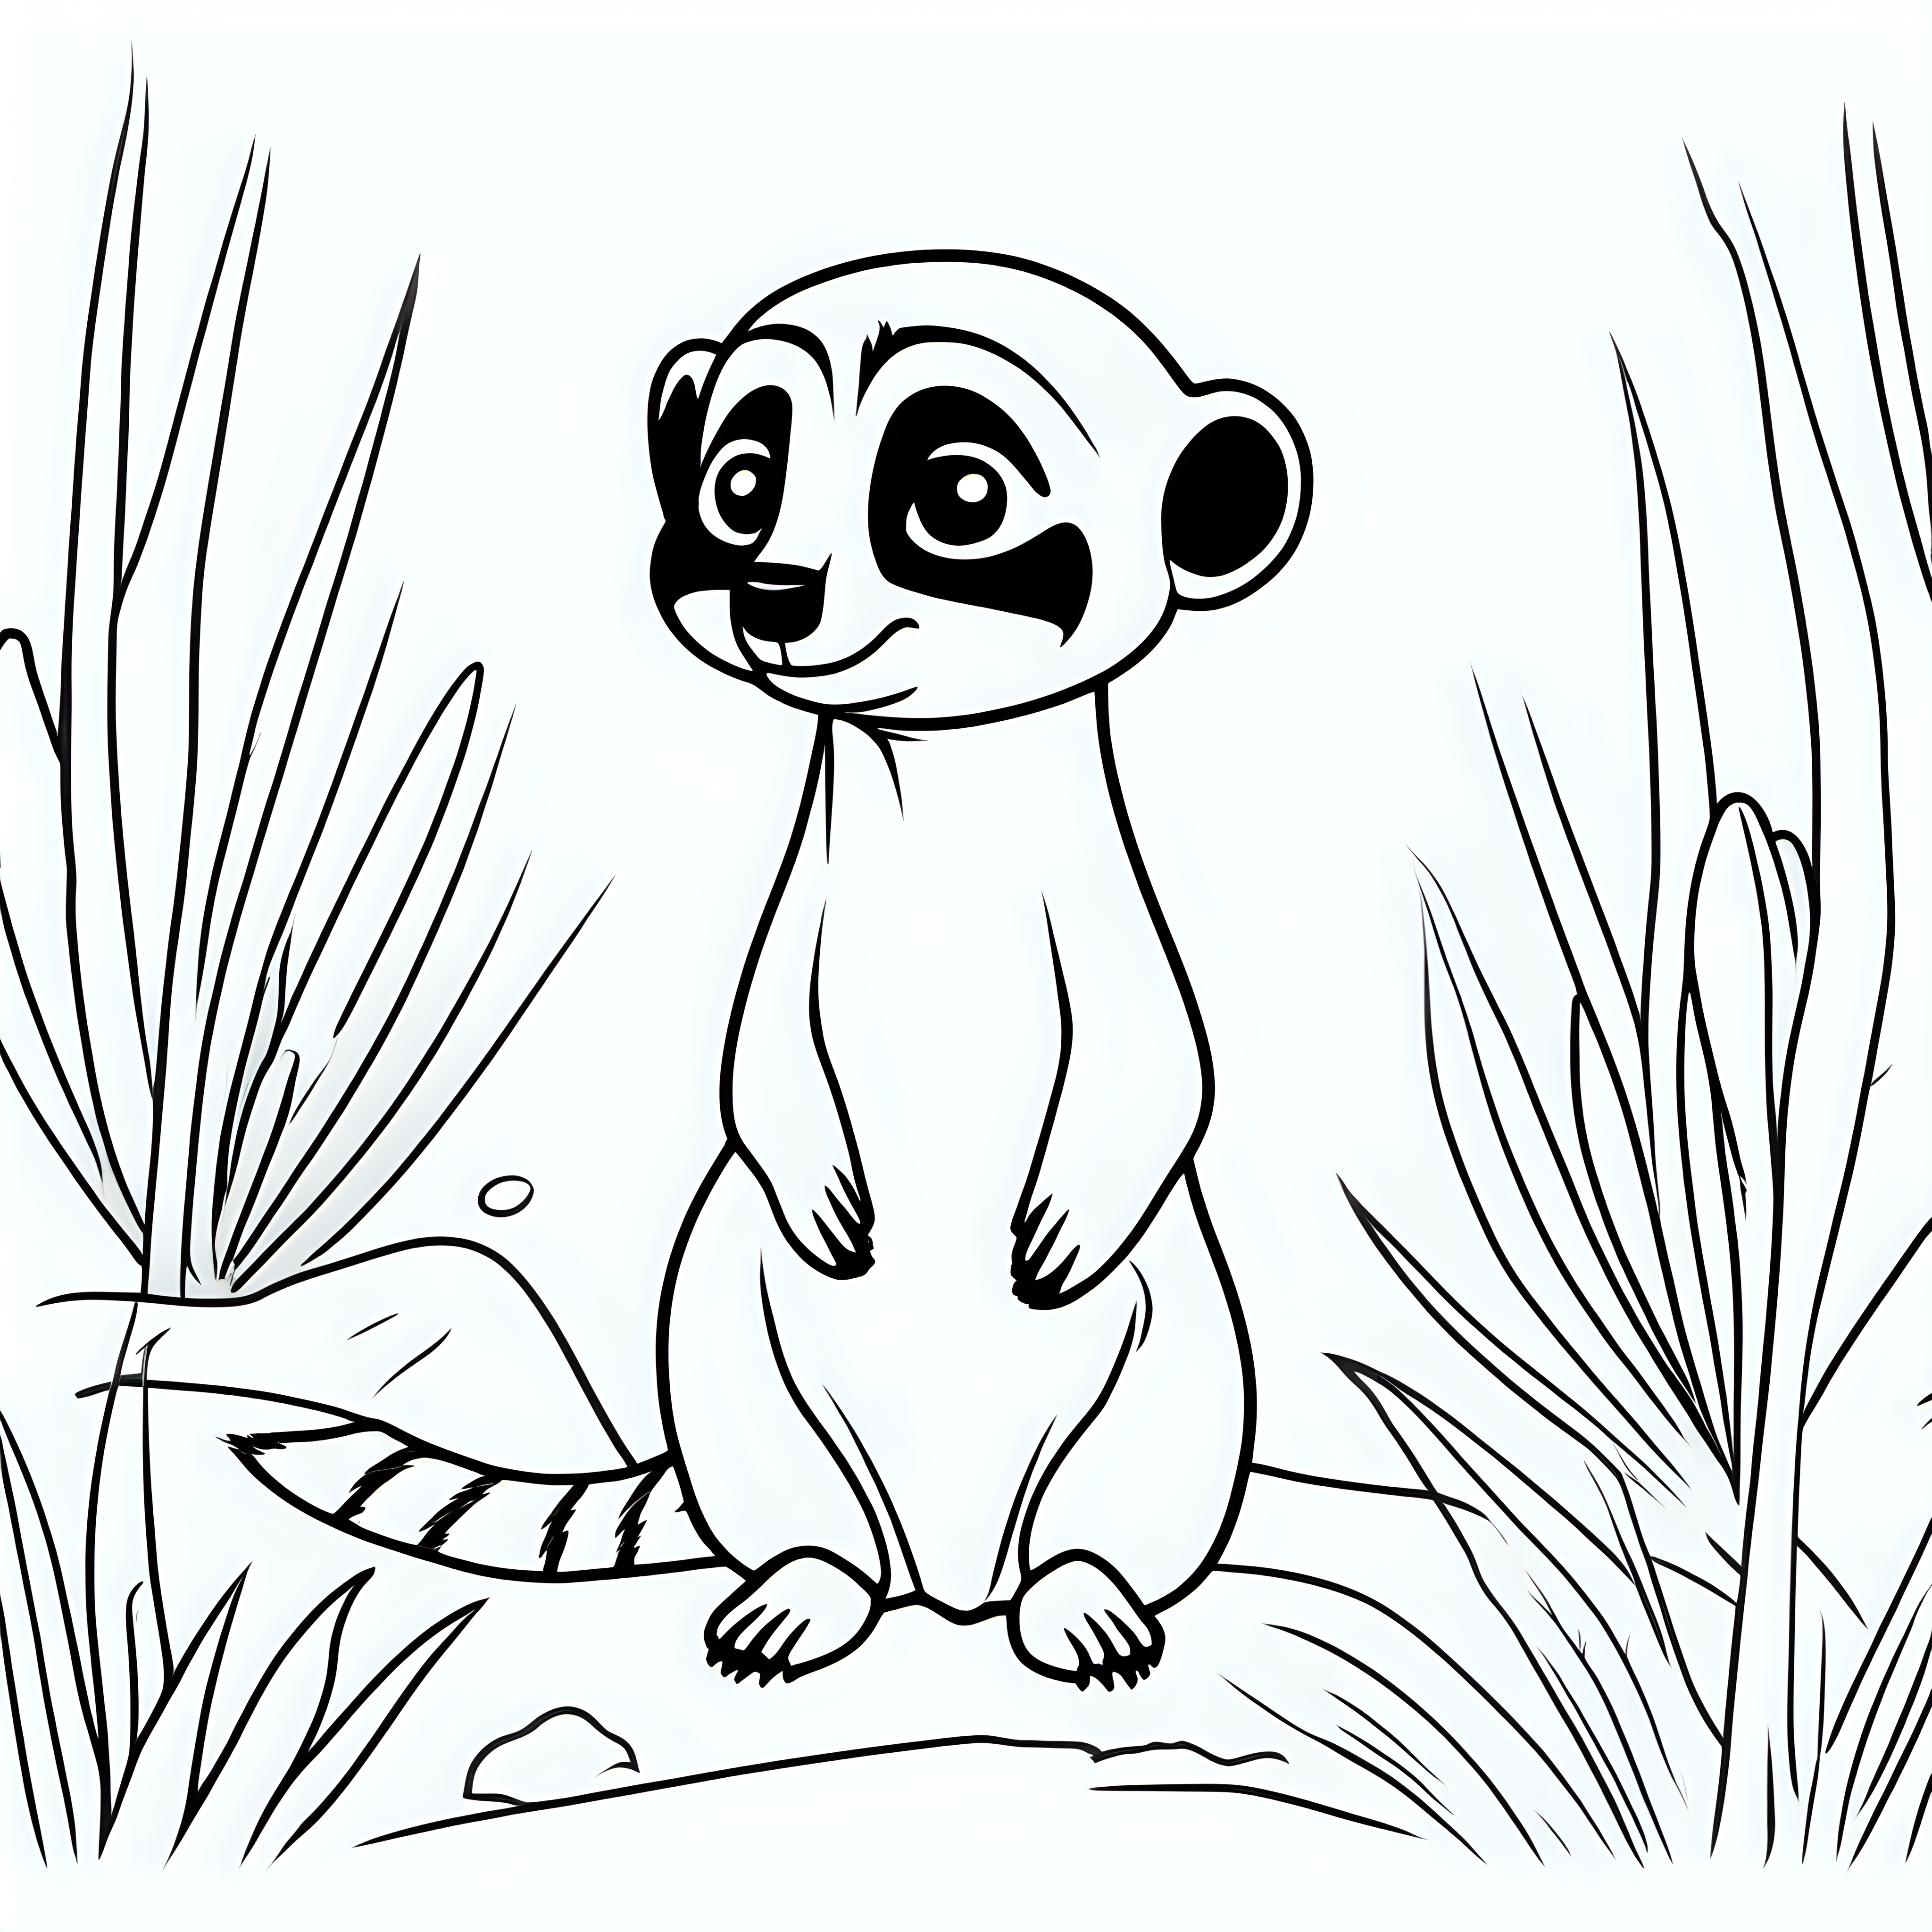 draw a cute meerkat with only the outline in black for a coloring book for kids